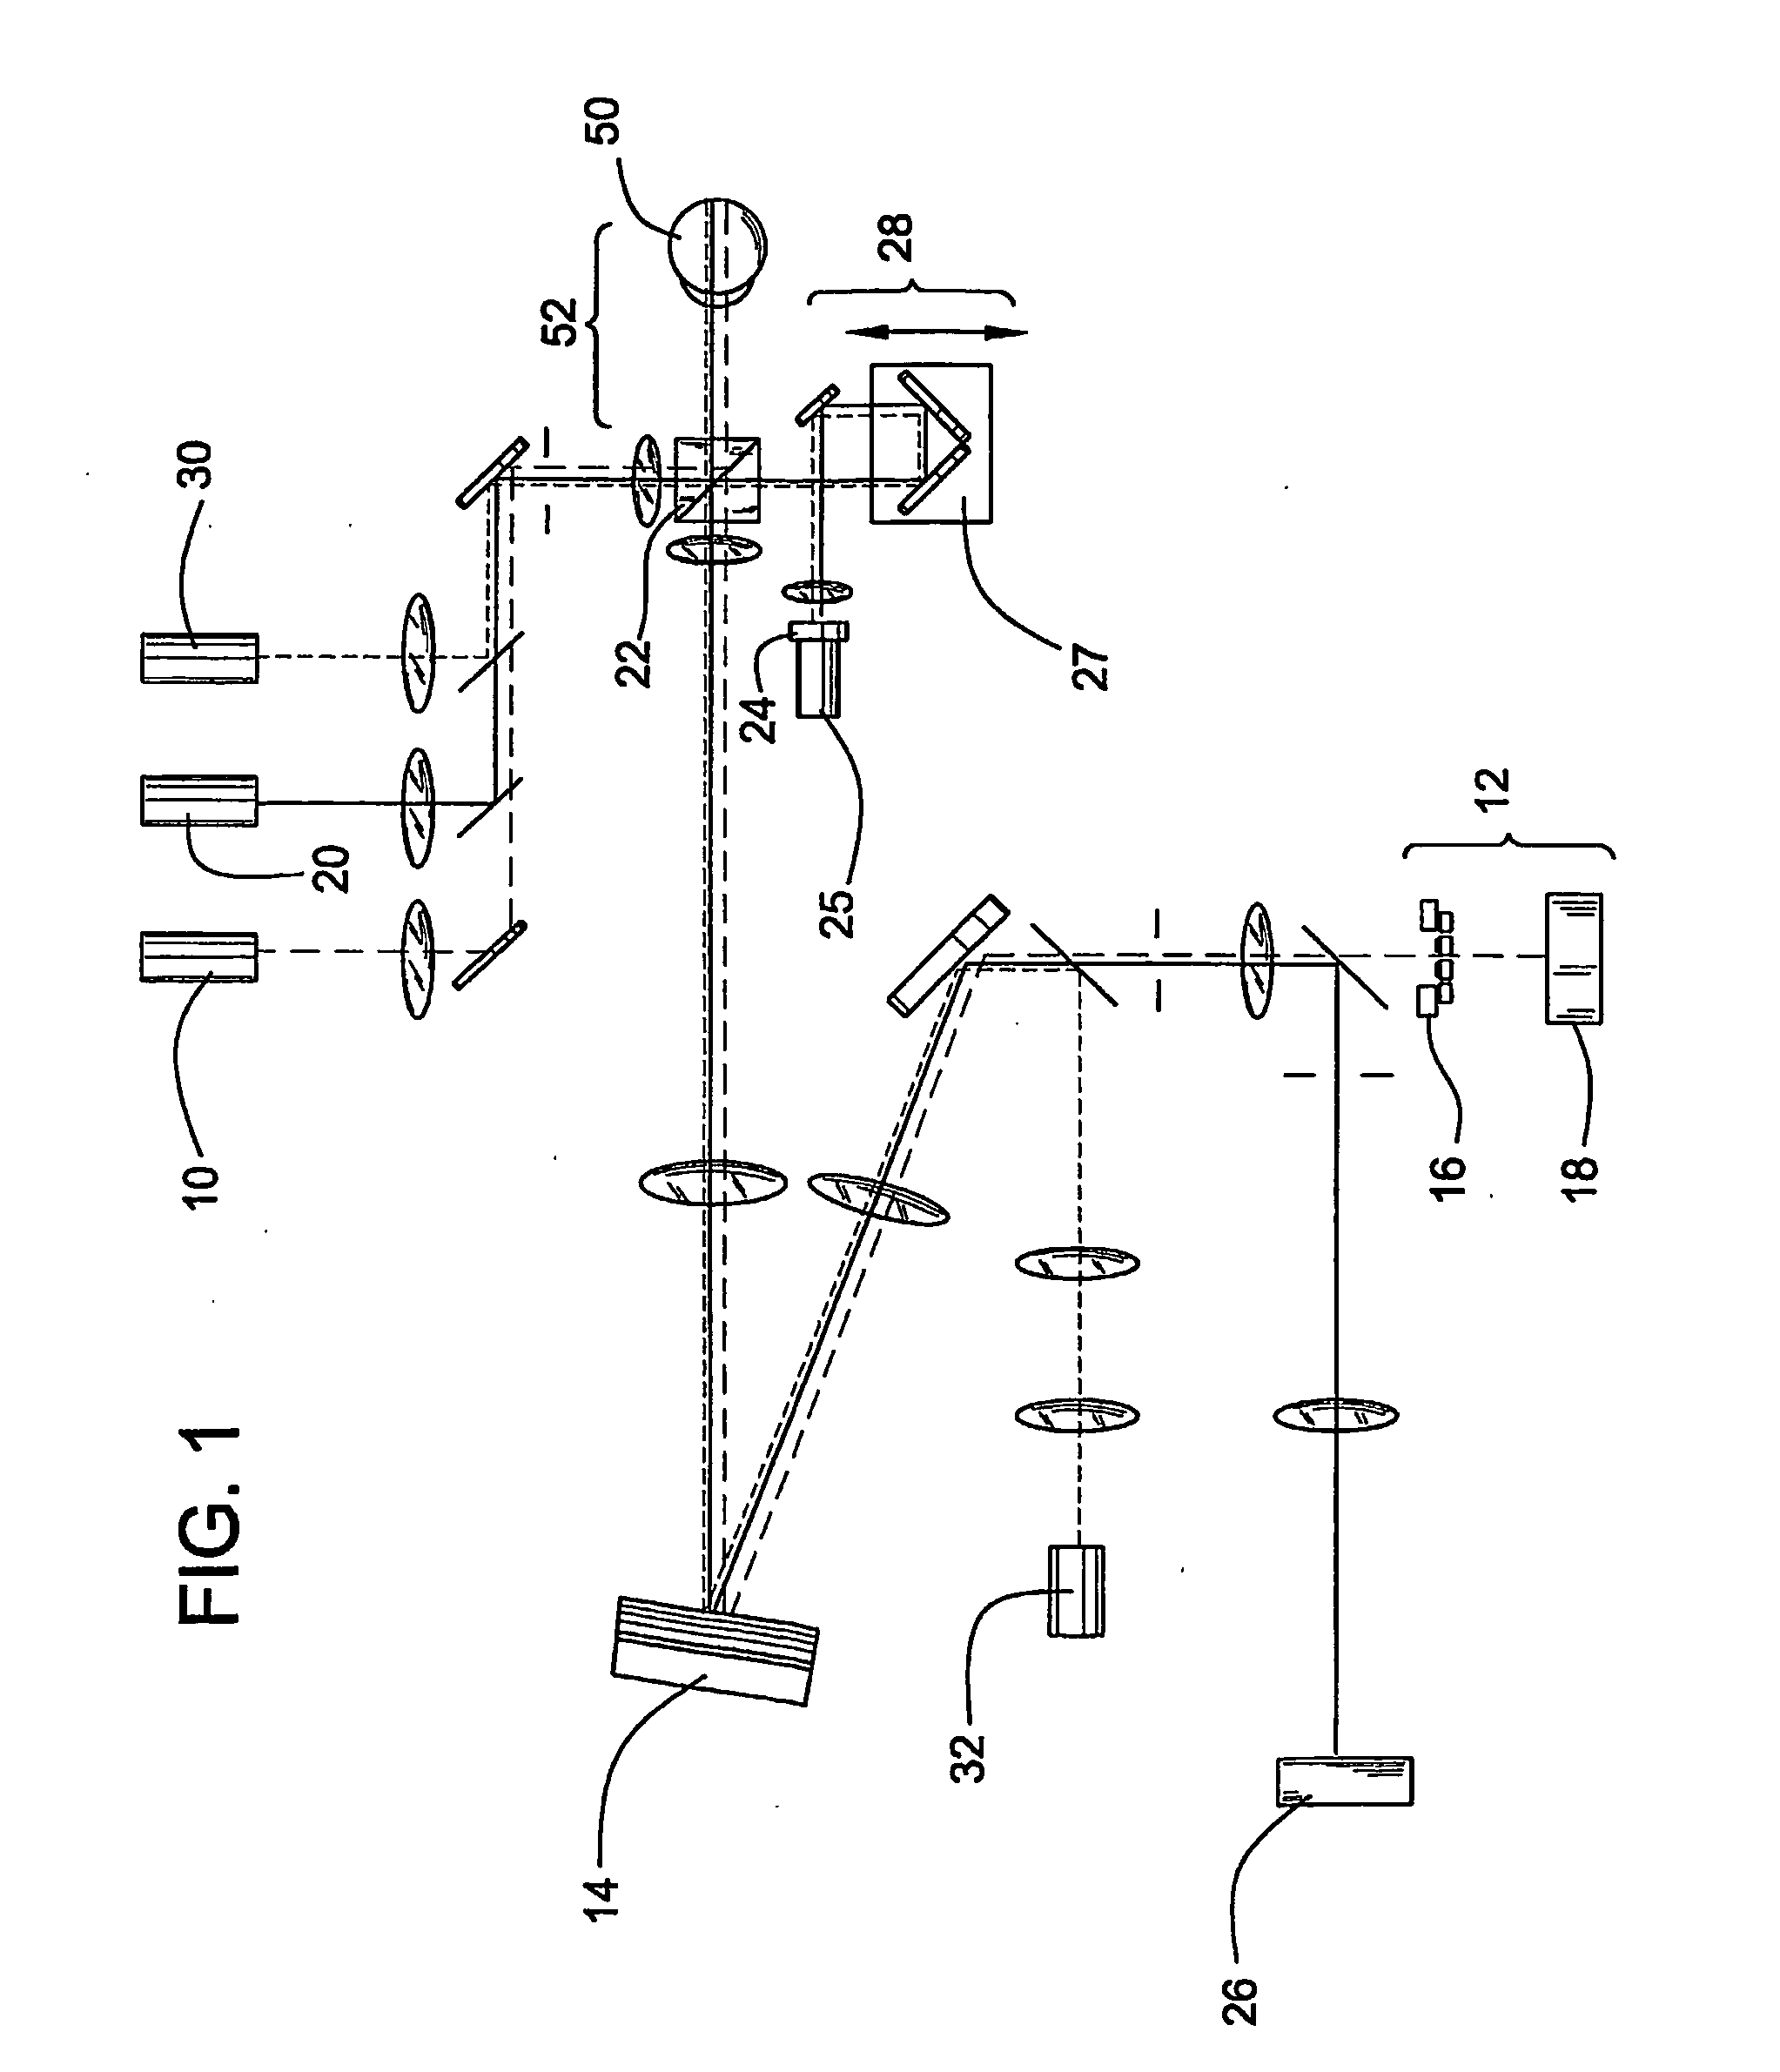 Method and apparatus for improving both lateral and axial resolution in ophthalmoscopy